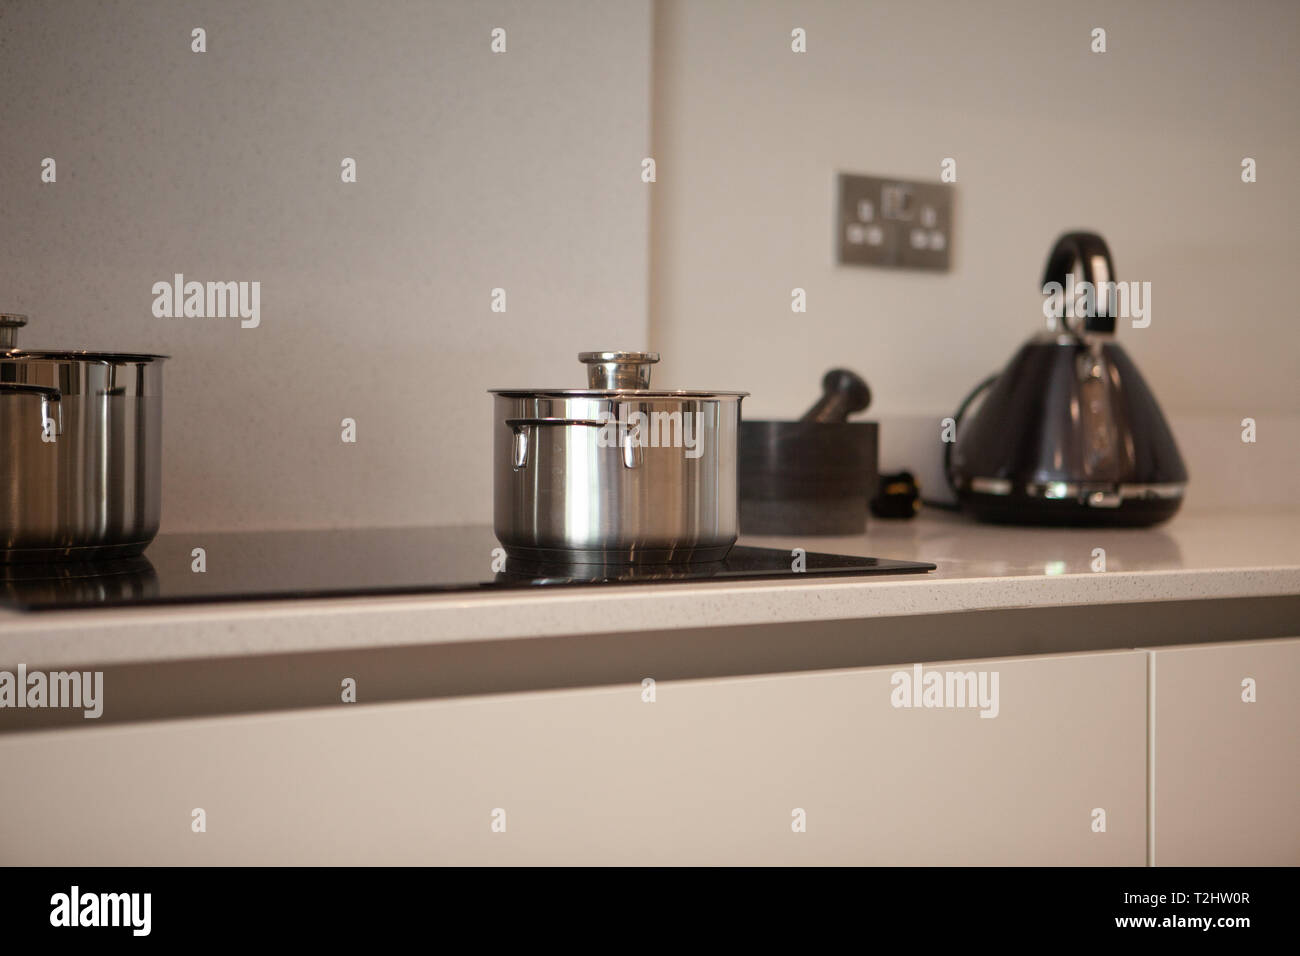 modern appliances and kitchen utensils on an induction hob in a modern kitchen. Stock Photo